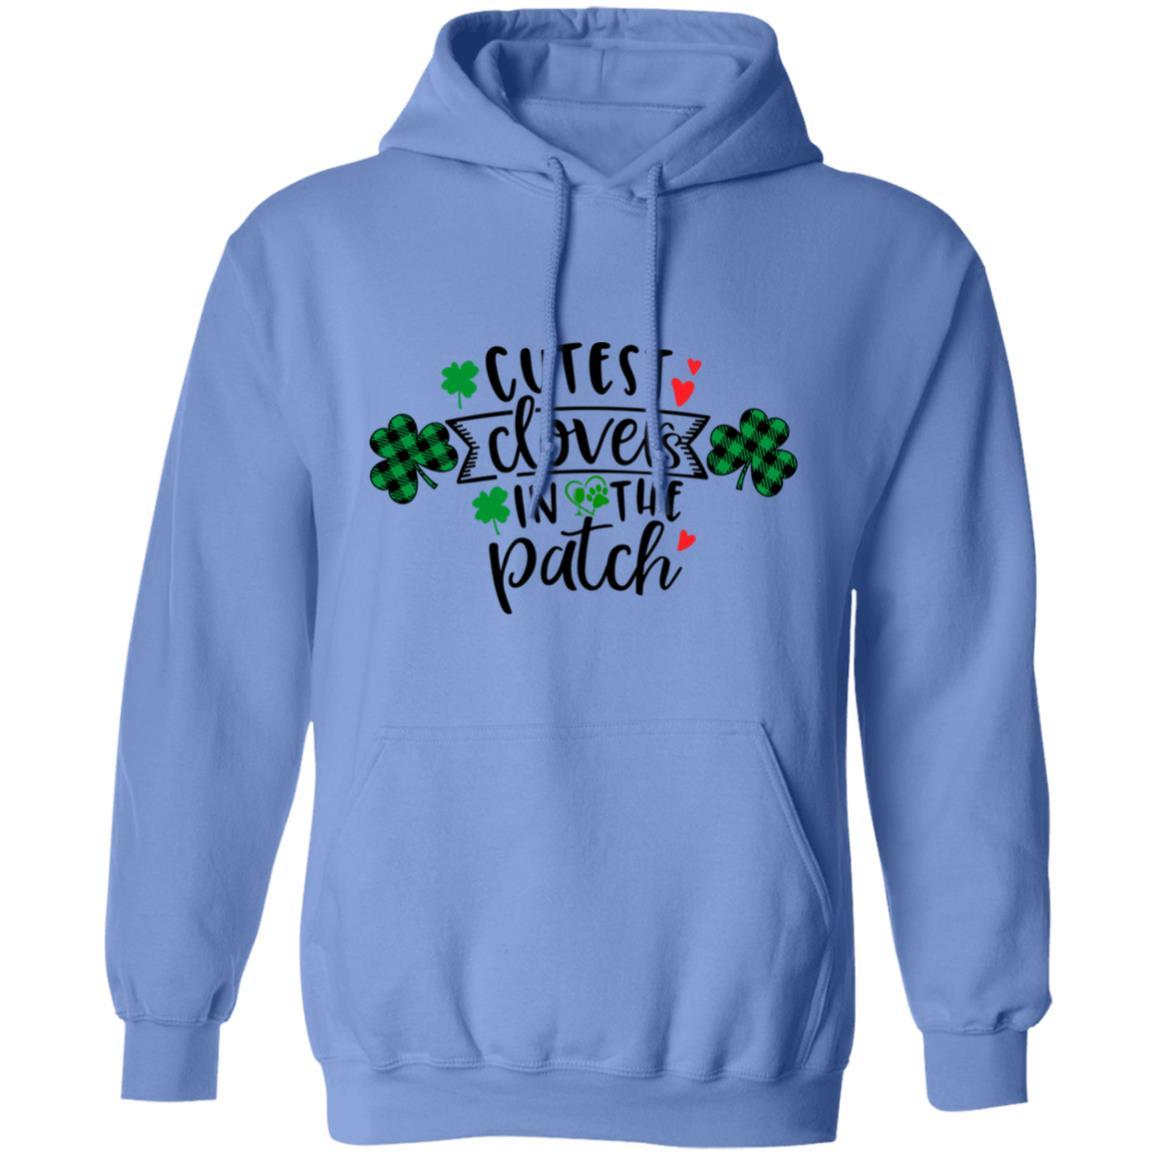 Sweatshirts Carolina Blue / S Winey Bitches Co "Cutest Clovers in the Patch" Pullover Hoodie 8 oz. WineyBitchesCo